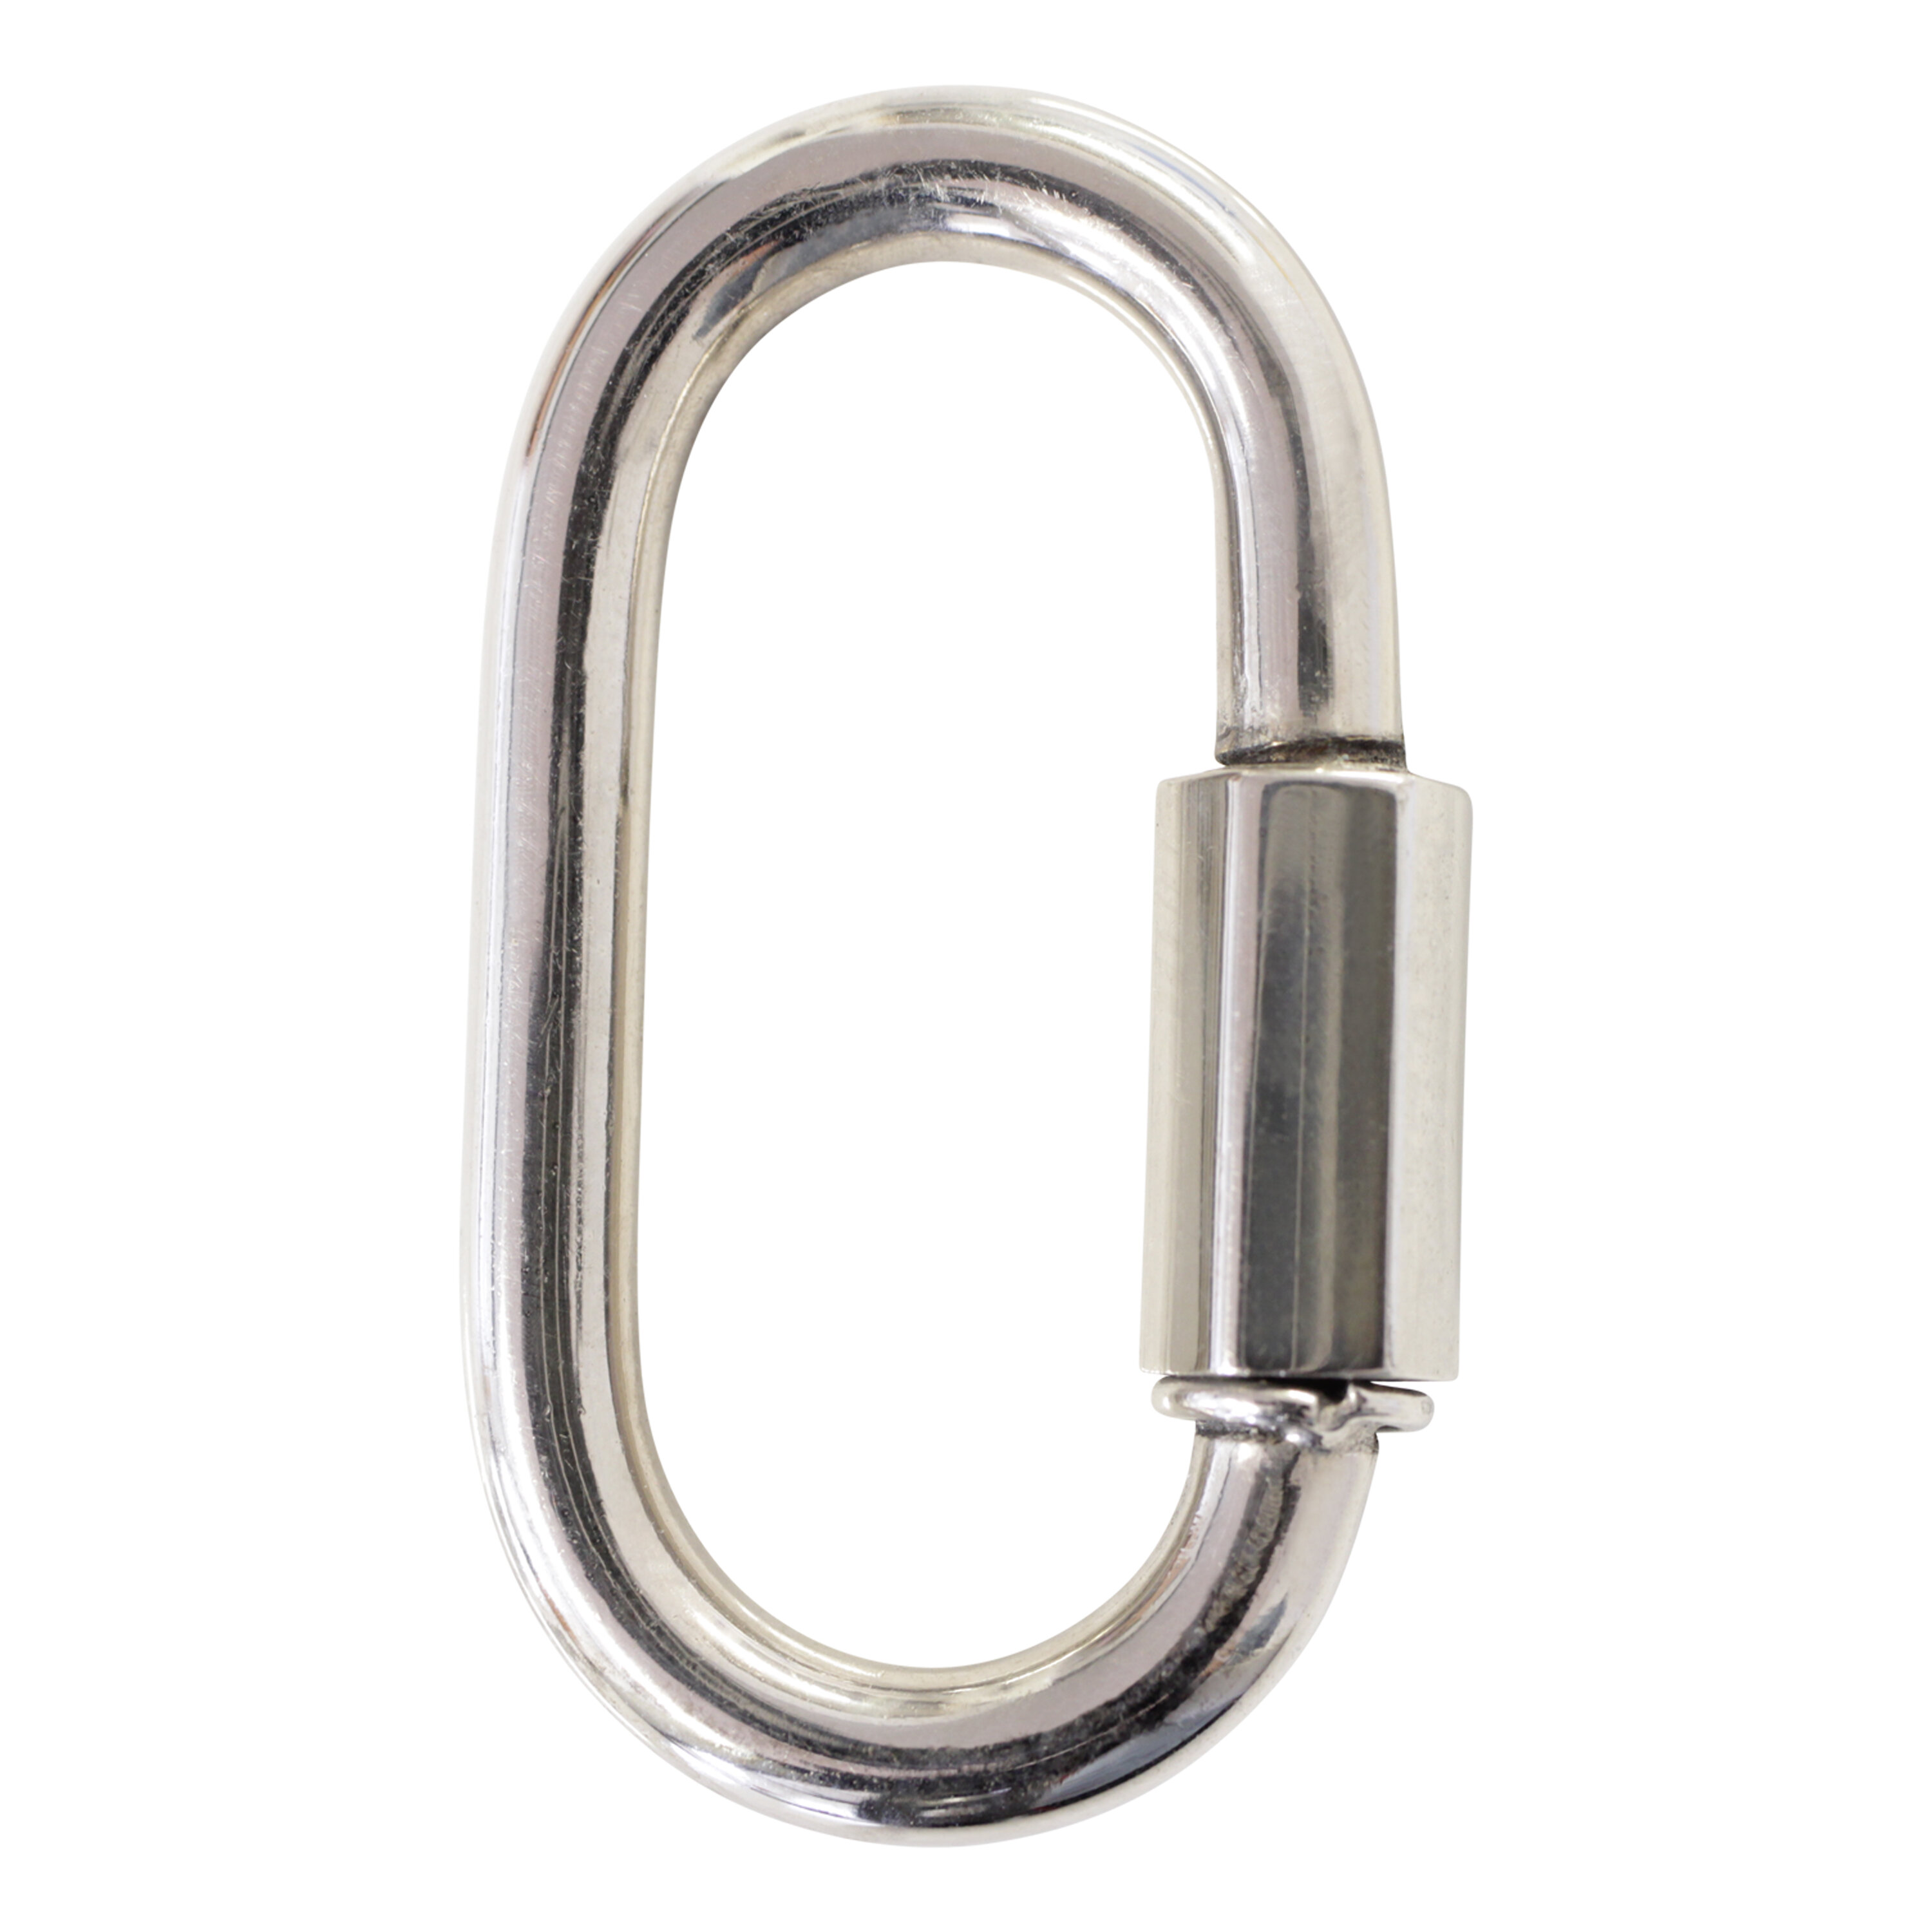 DIRECT HARDWARE 6 of Quick Link Chain Repair Shackle 10Mm 7/16 Bzp Zinc Plated Steel 